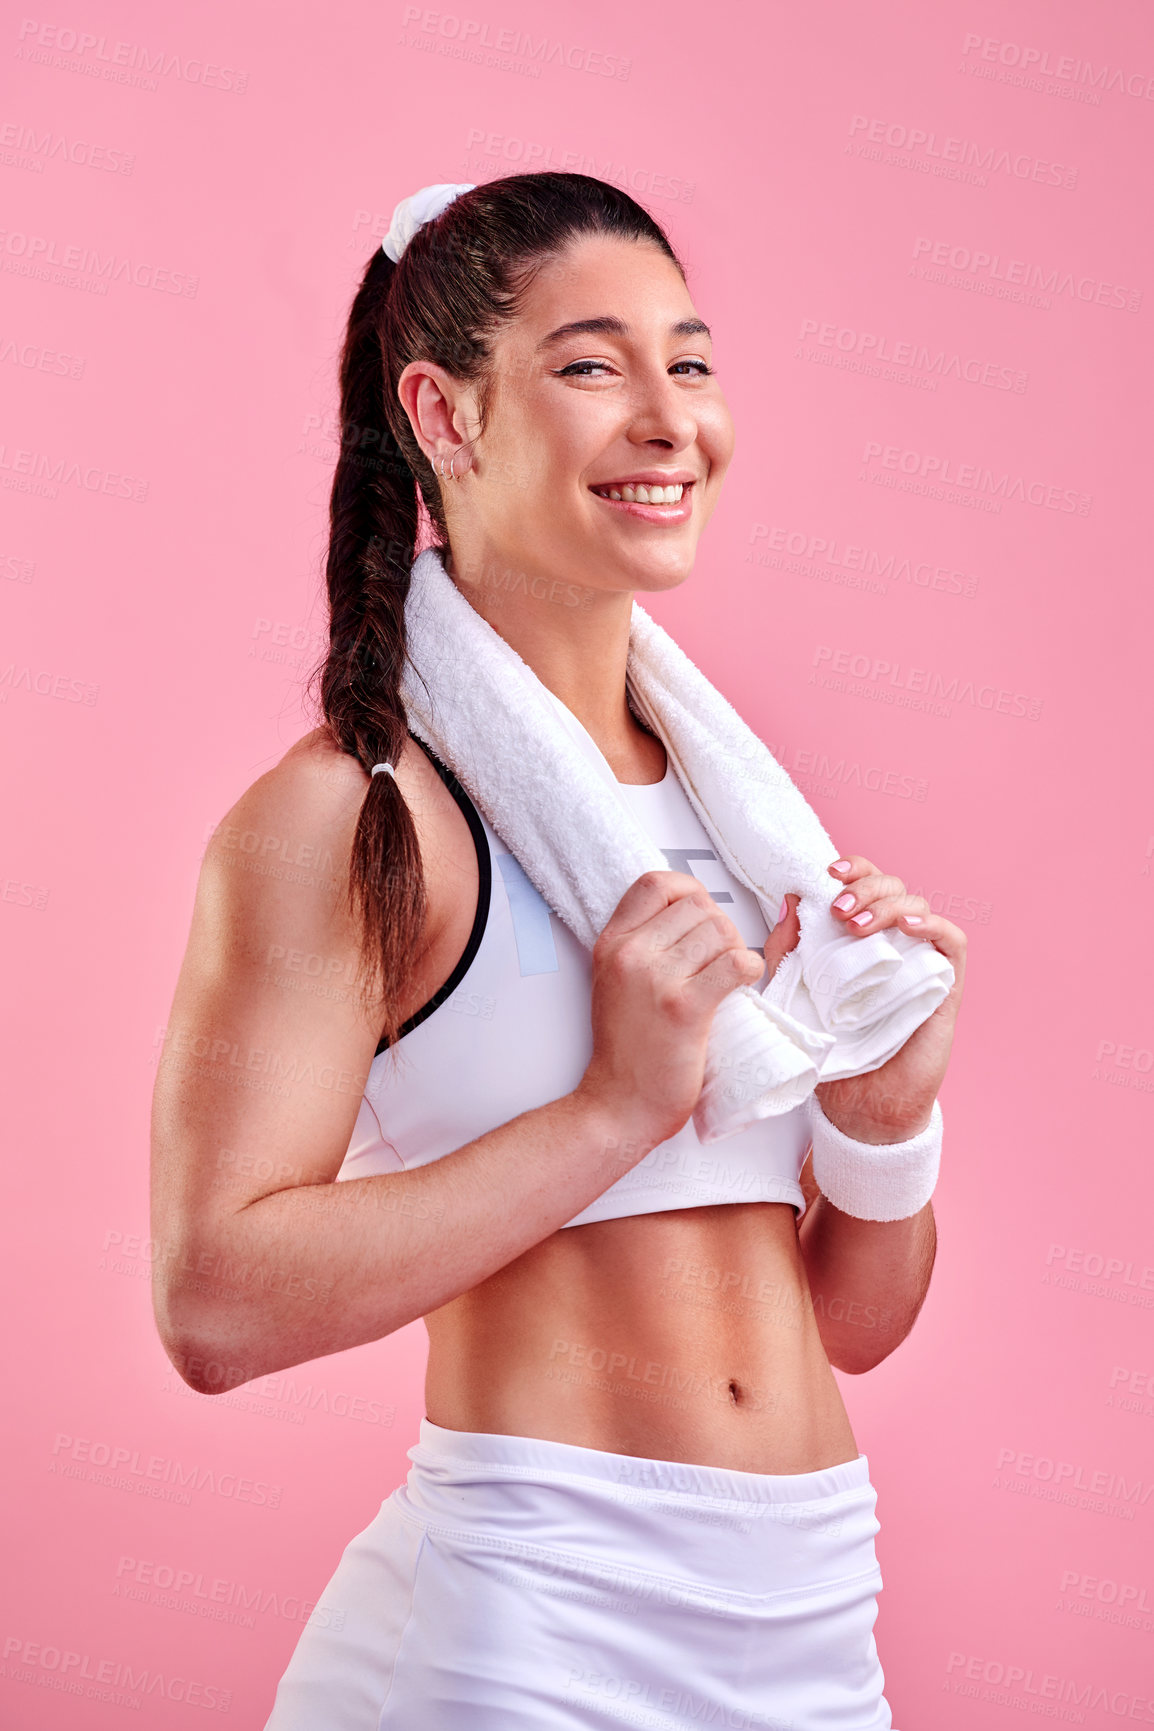 Buy stock photo Studio portrait of a sporty young woman posing with a towel around her neck against a pink background